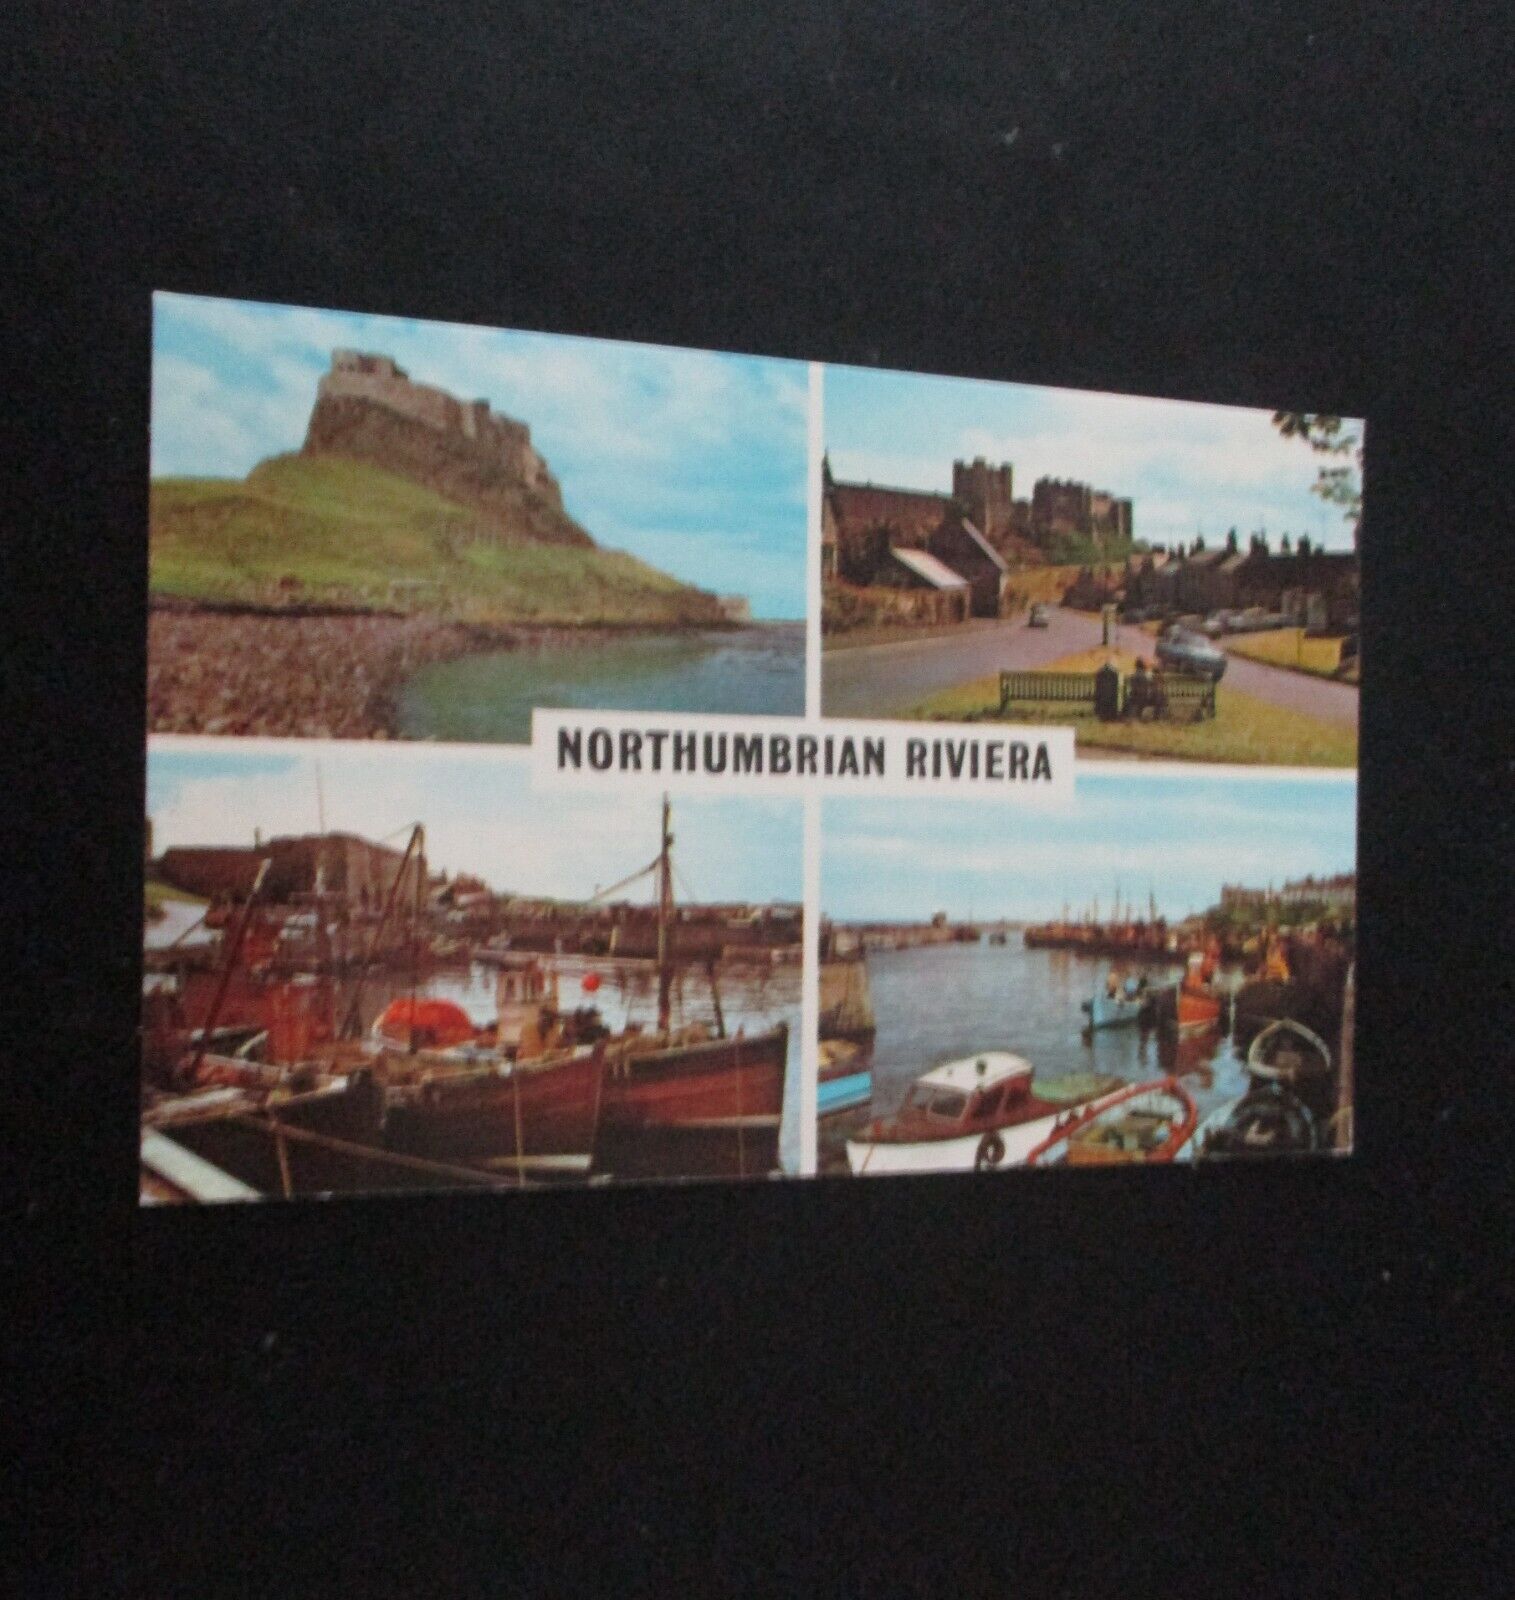 NORTHUMBRIAN RIVIERA -Multiview- Lindisfarne Castle, Seahouses Harbour, Bamburgh